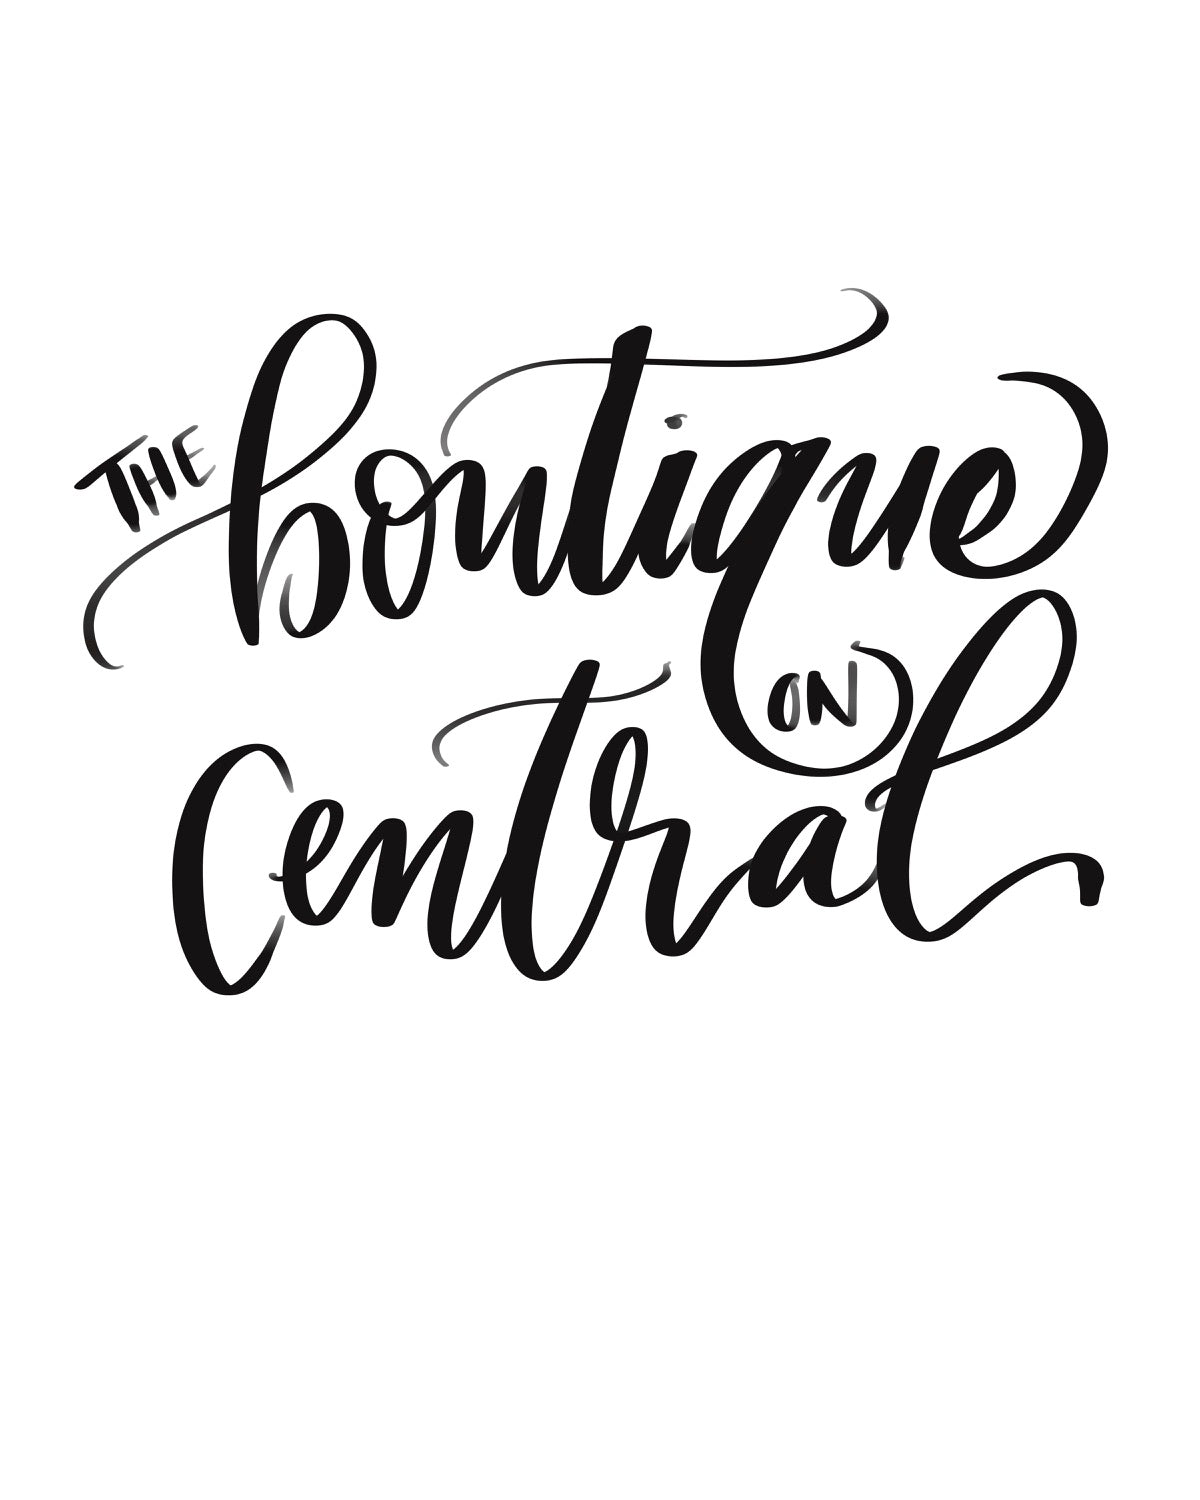 The Boutique on Central